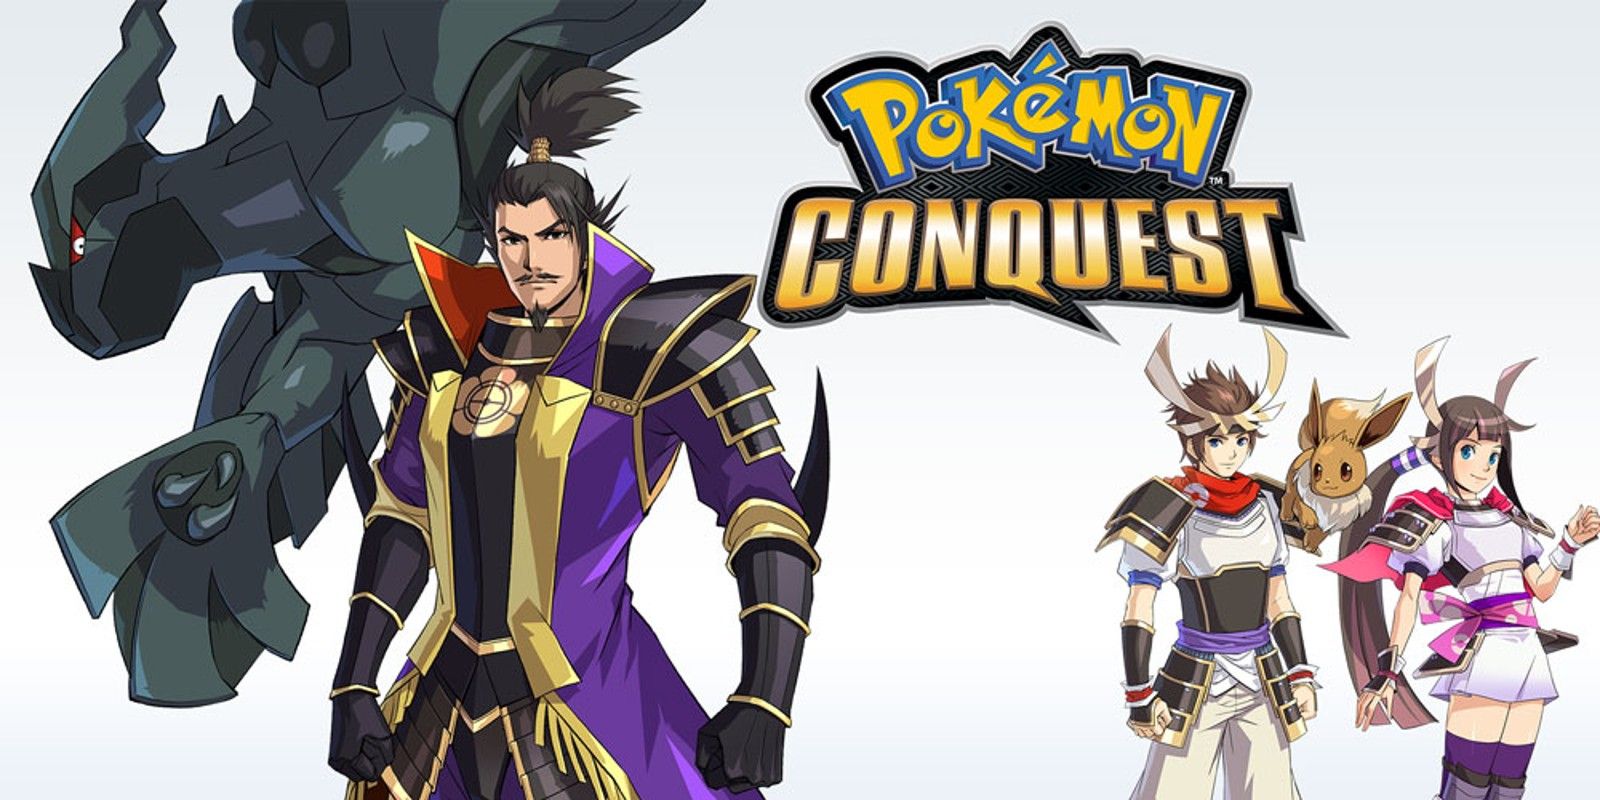 Promo art for Pokémon Conquest and its characters